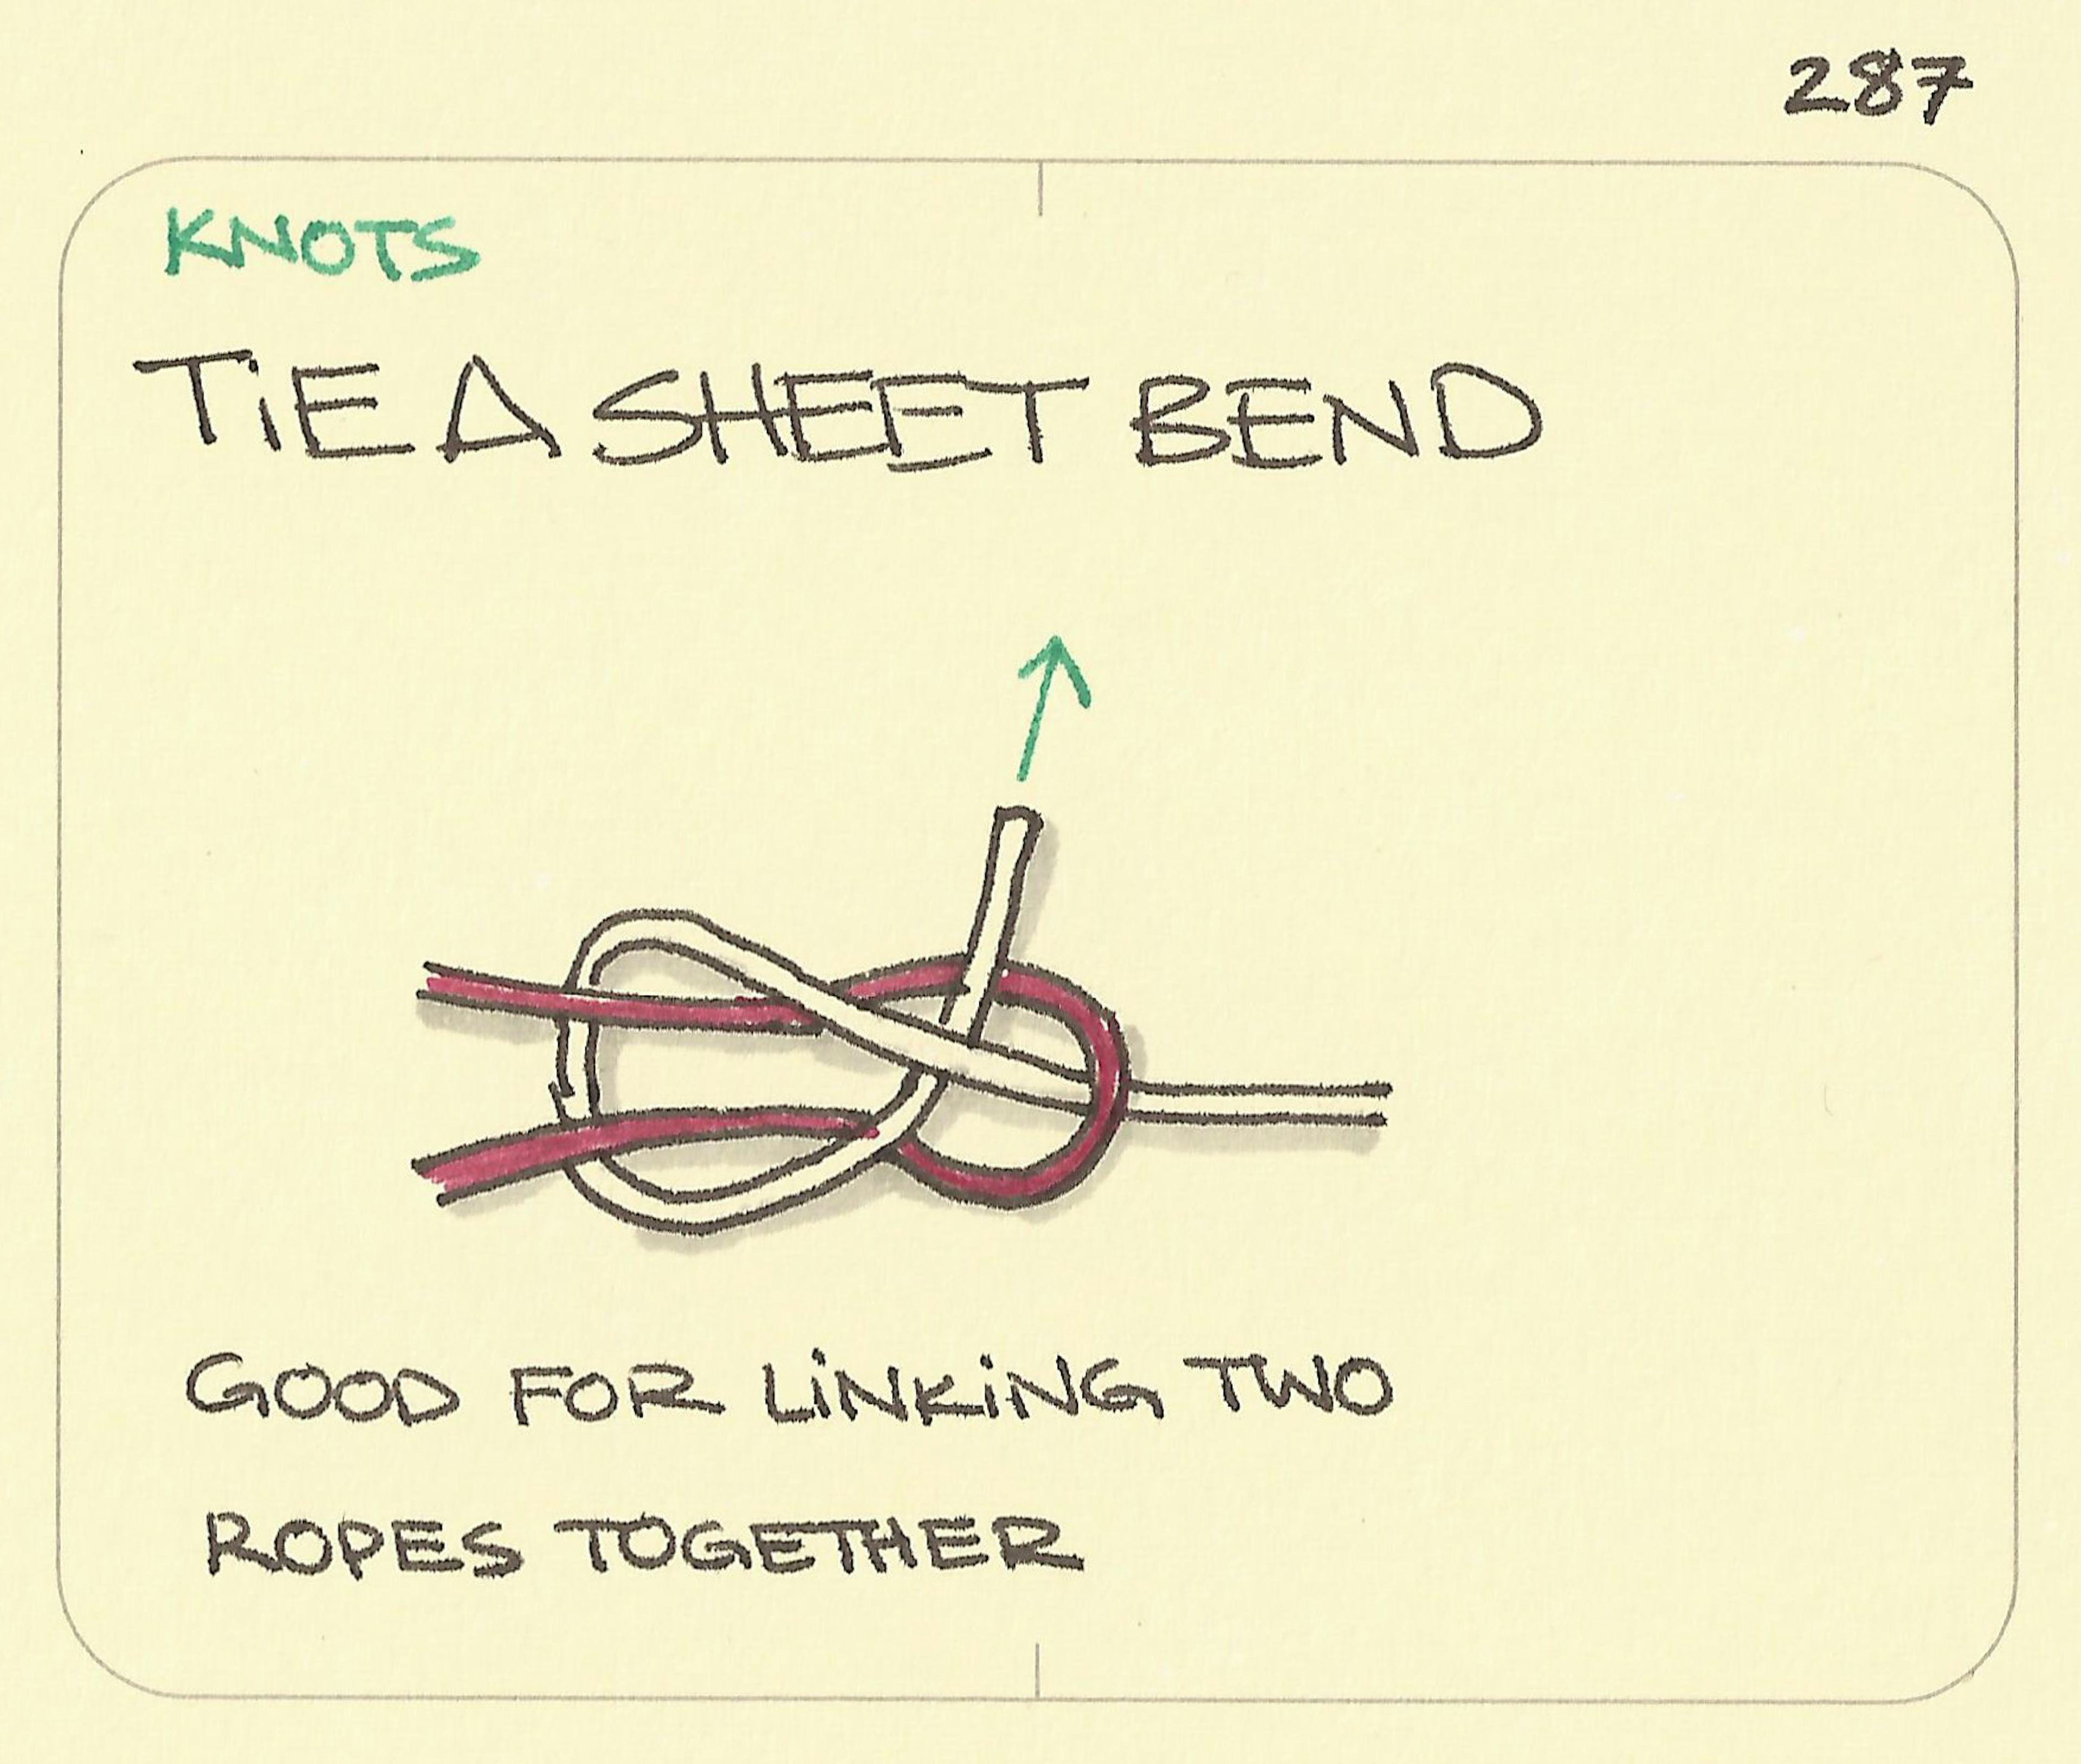 Tie A Sheet Bend illustration: the interaction between one red and one white length of rope is shown in the correct manner for tying a sheet bend knot. The knot is often used for joining two lengths of rope together. 